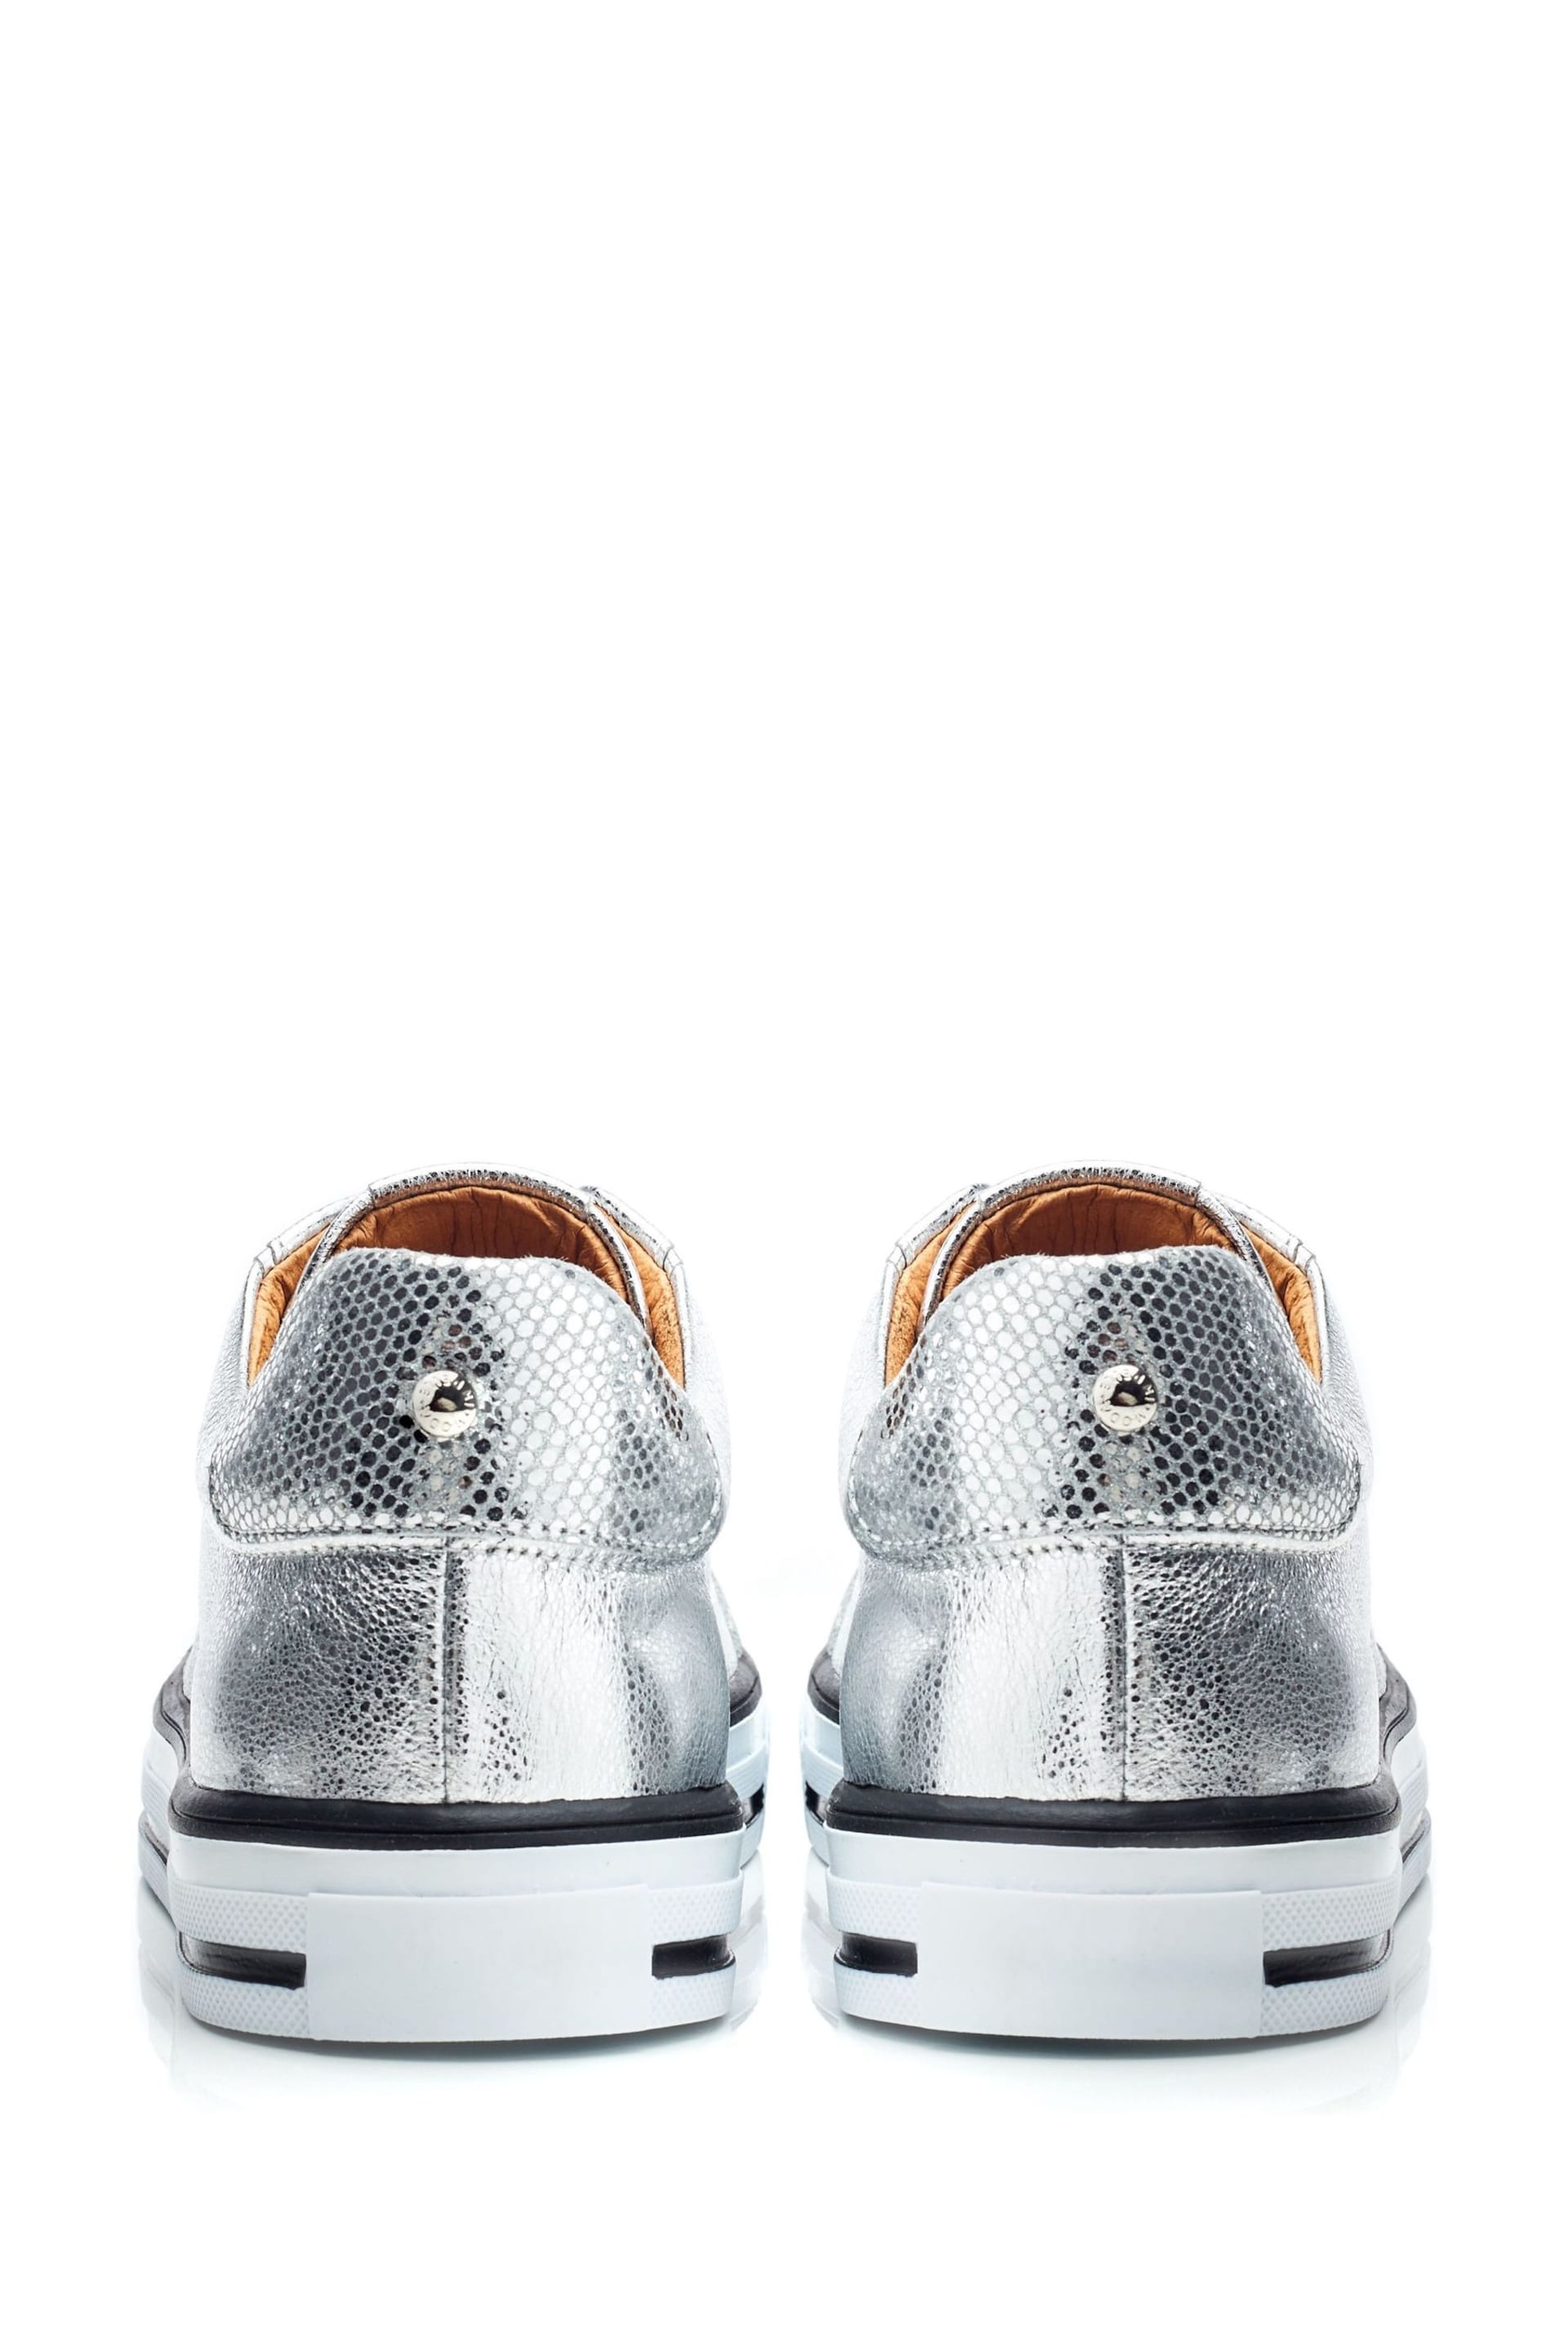 Moda in Pelle Silver Benni Elastic Slip On Trainers With Foxing Sole - Image 3 of 4